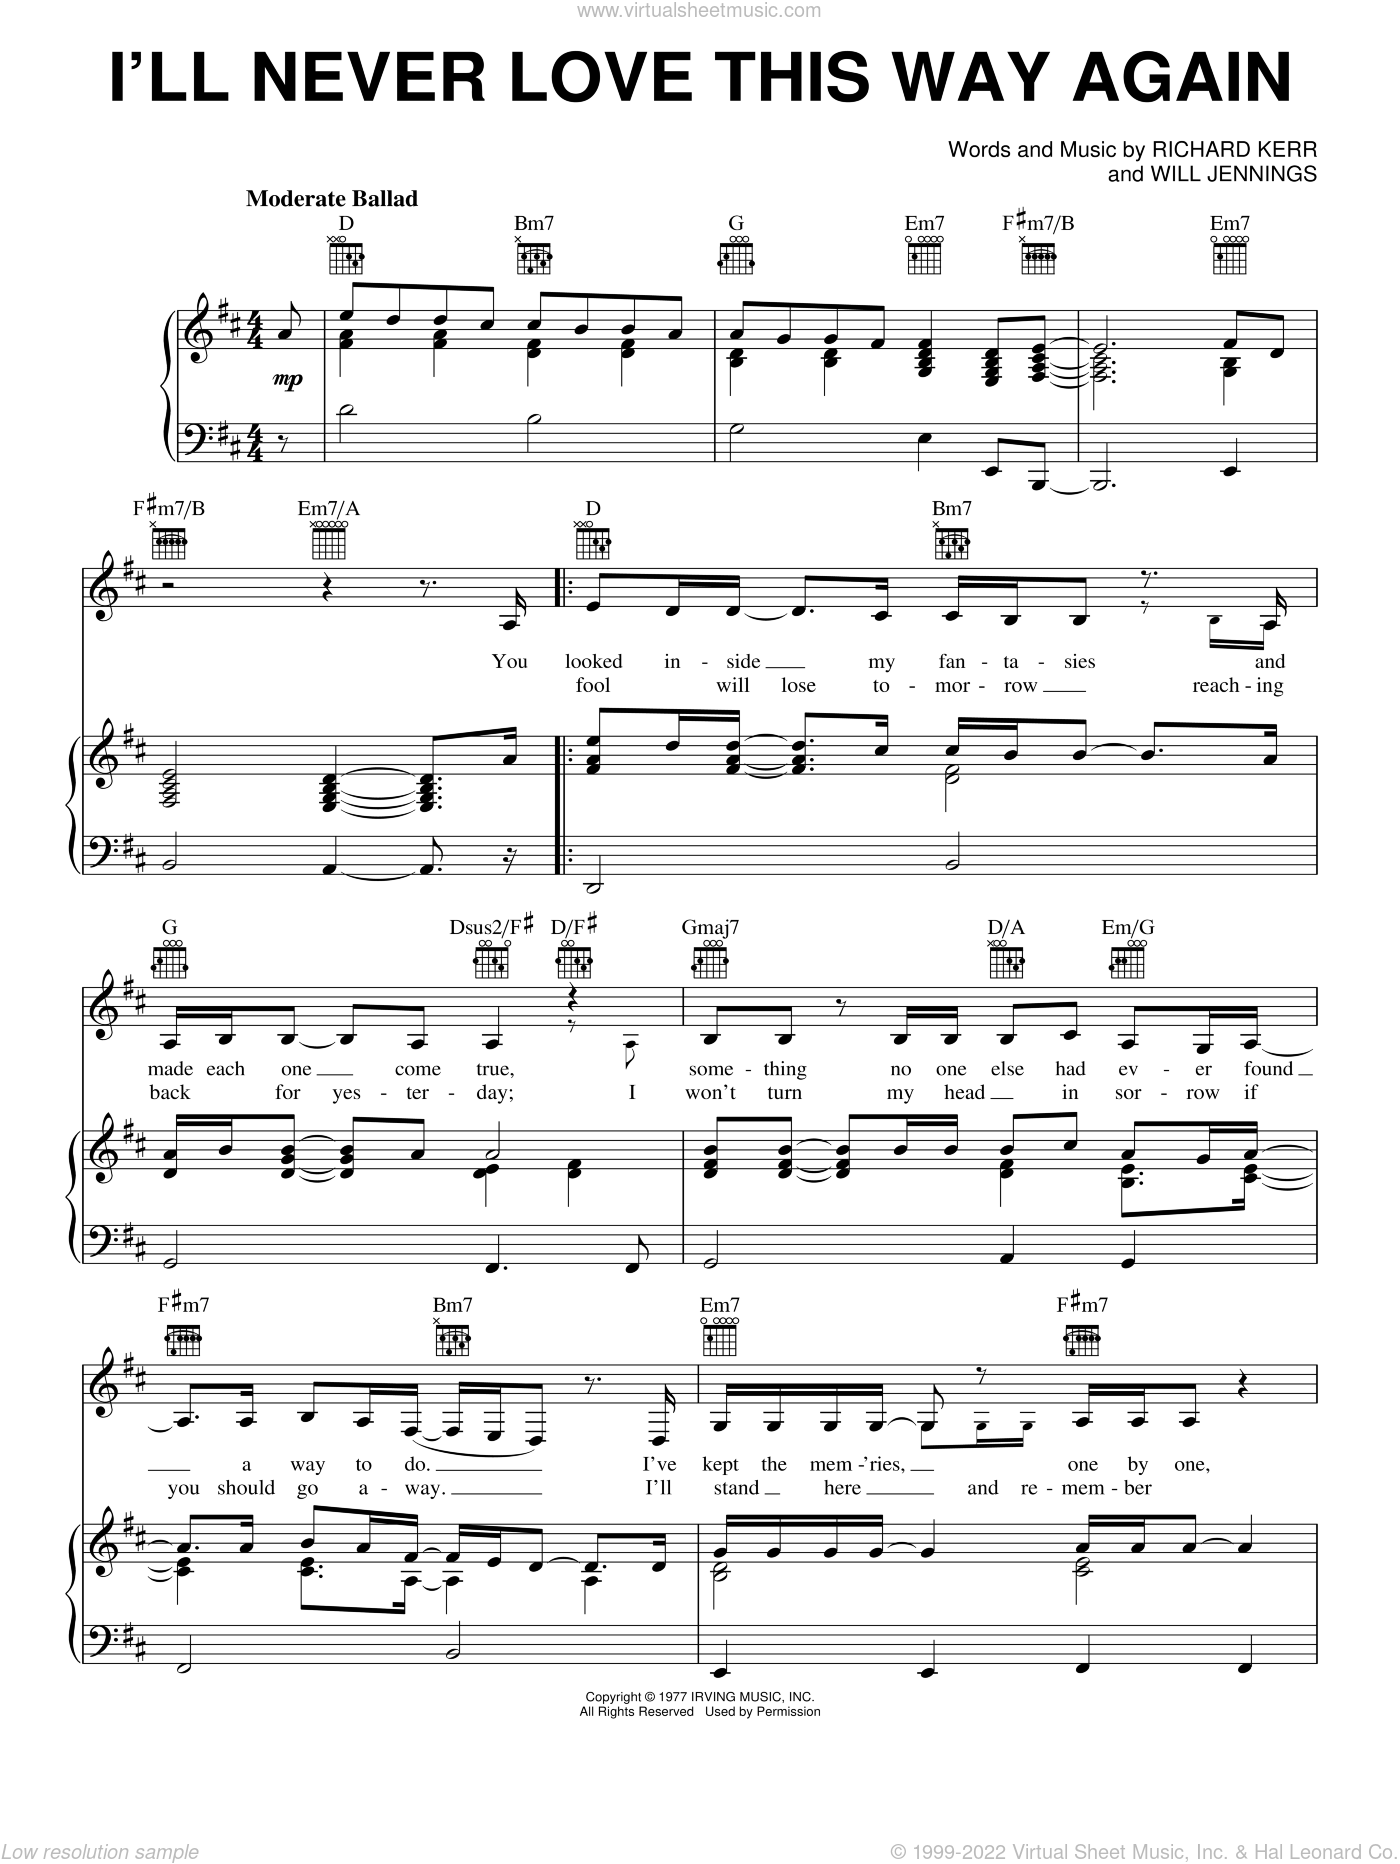 Warwick - I'll Never Love This Way Again sheet music for voice, piano